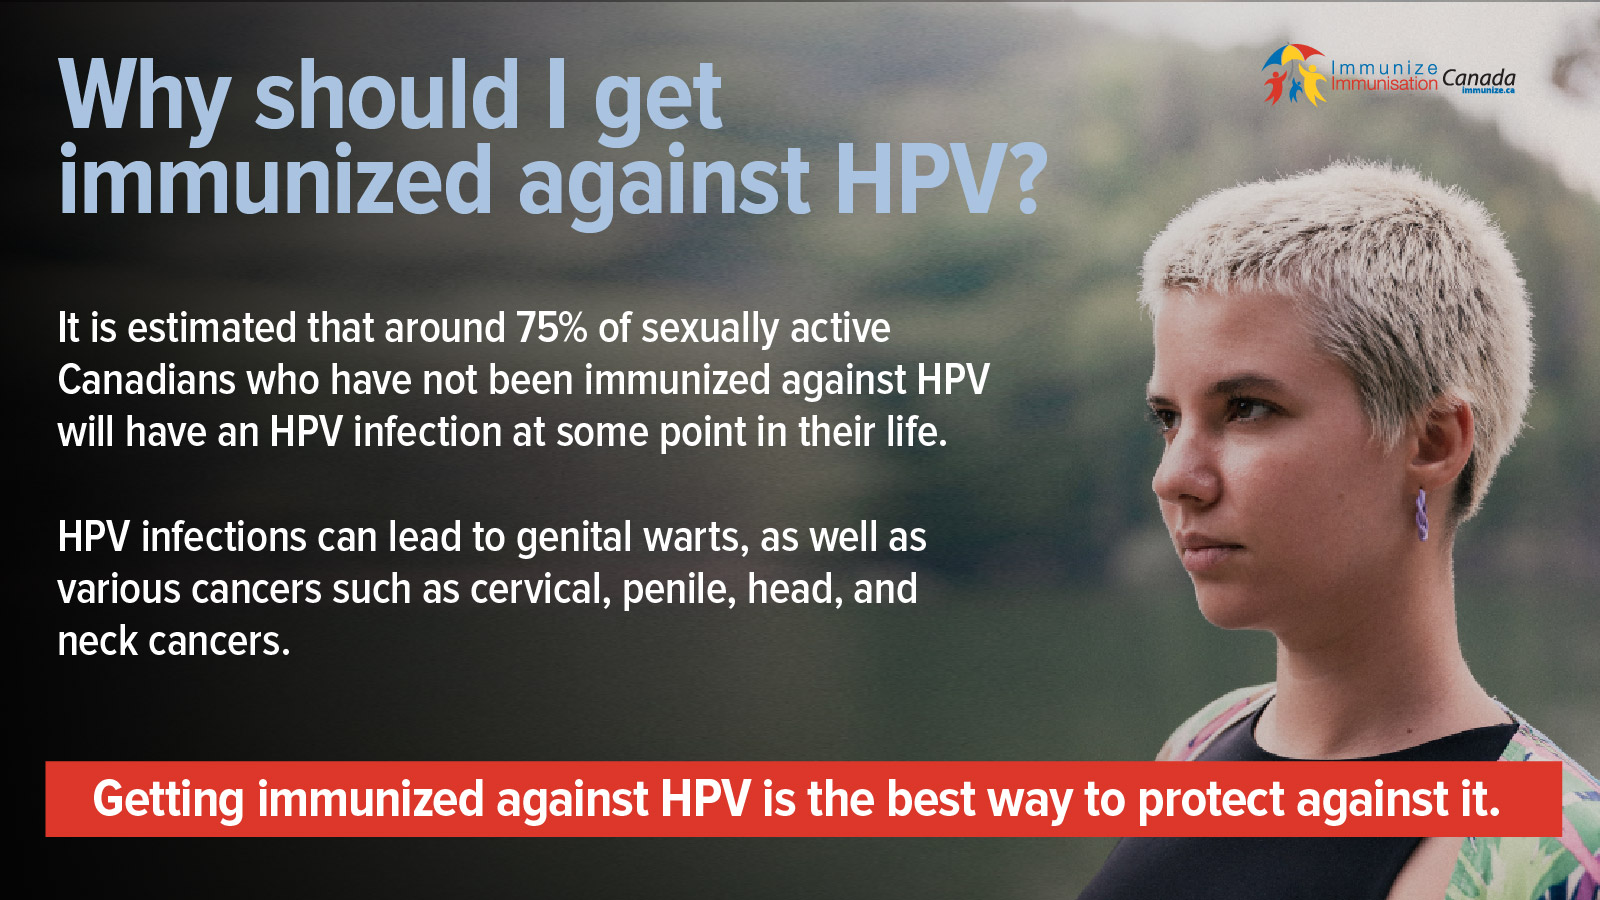 Why should I get immunized against HPV? (social media image for Twitter)